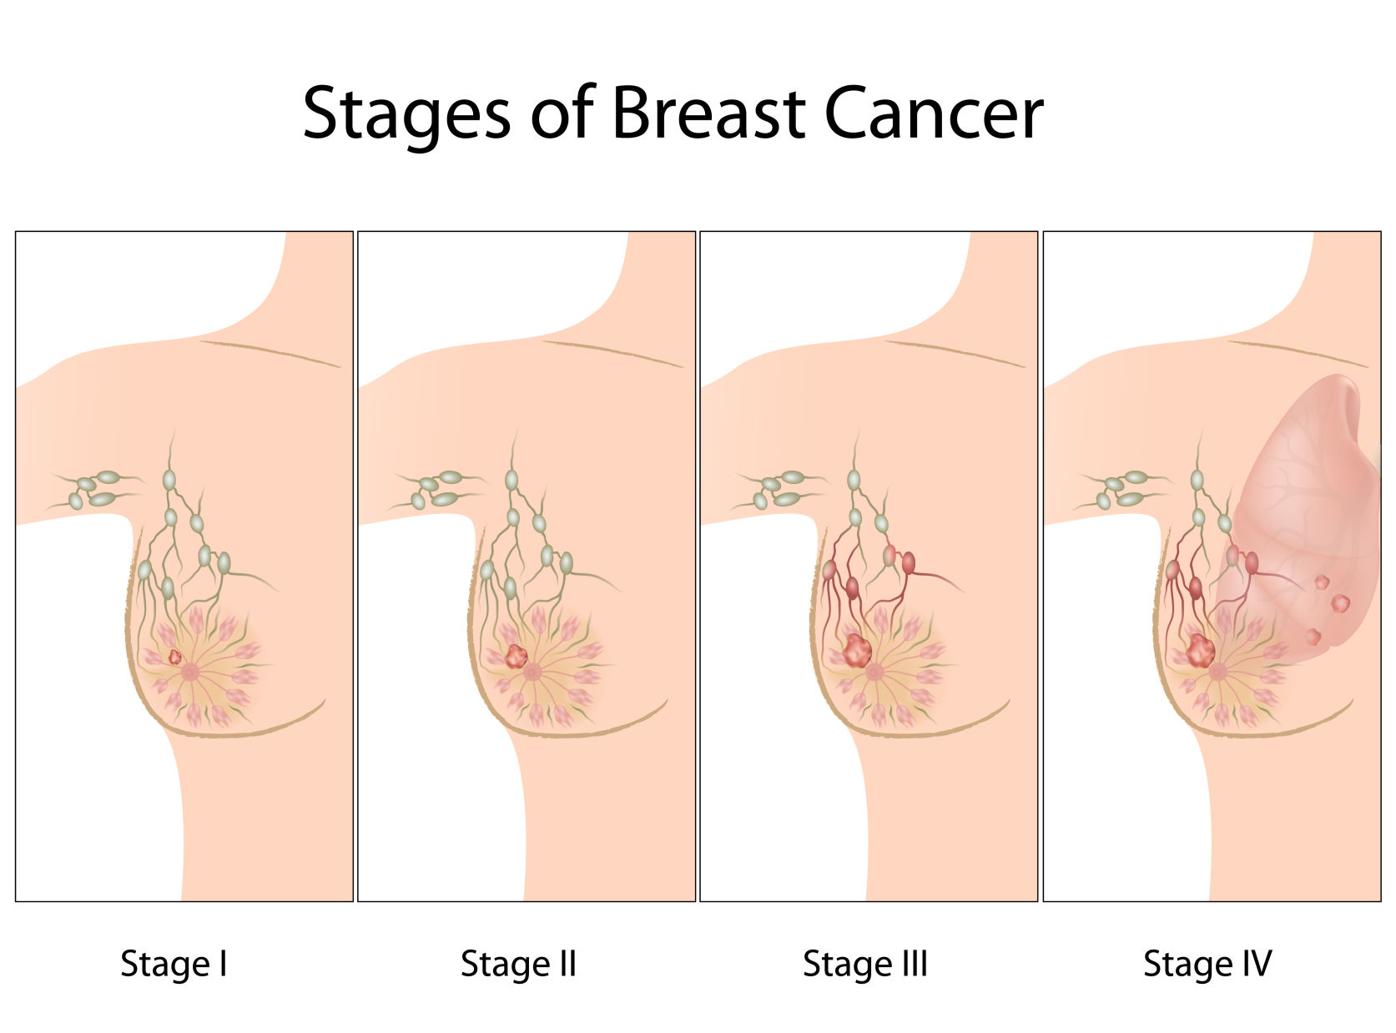 The stages of breast cancer